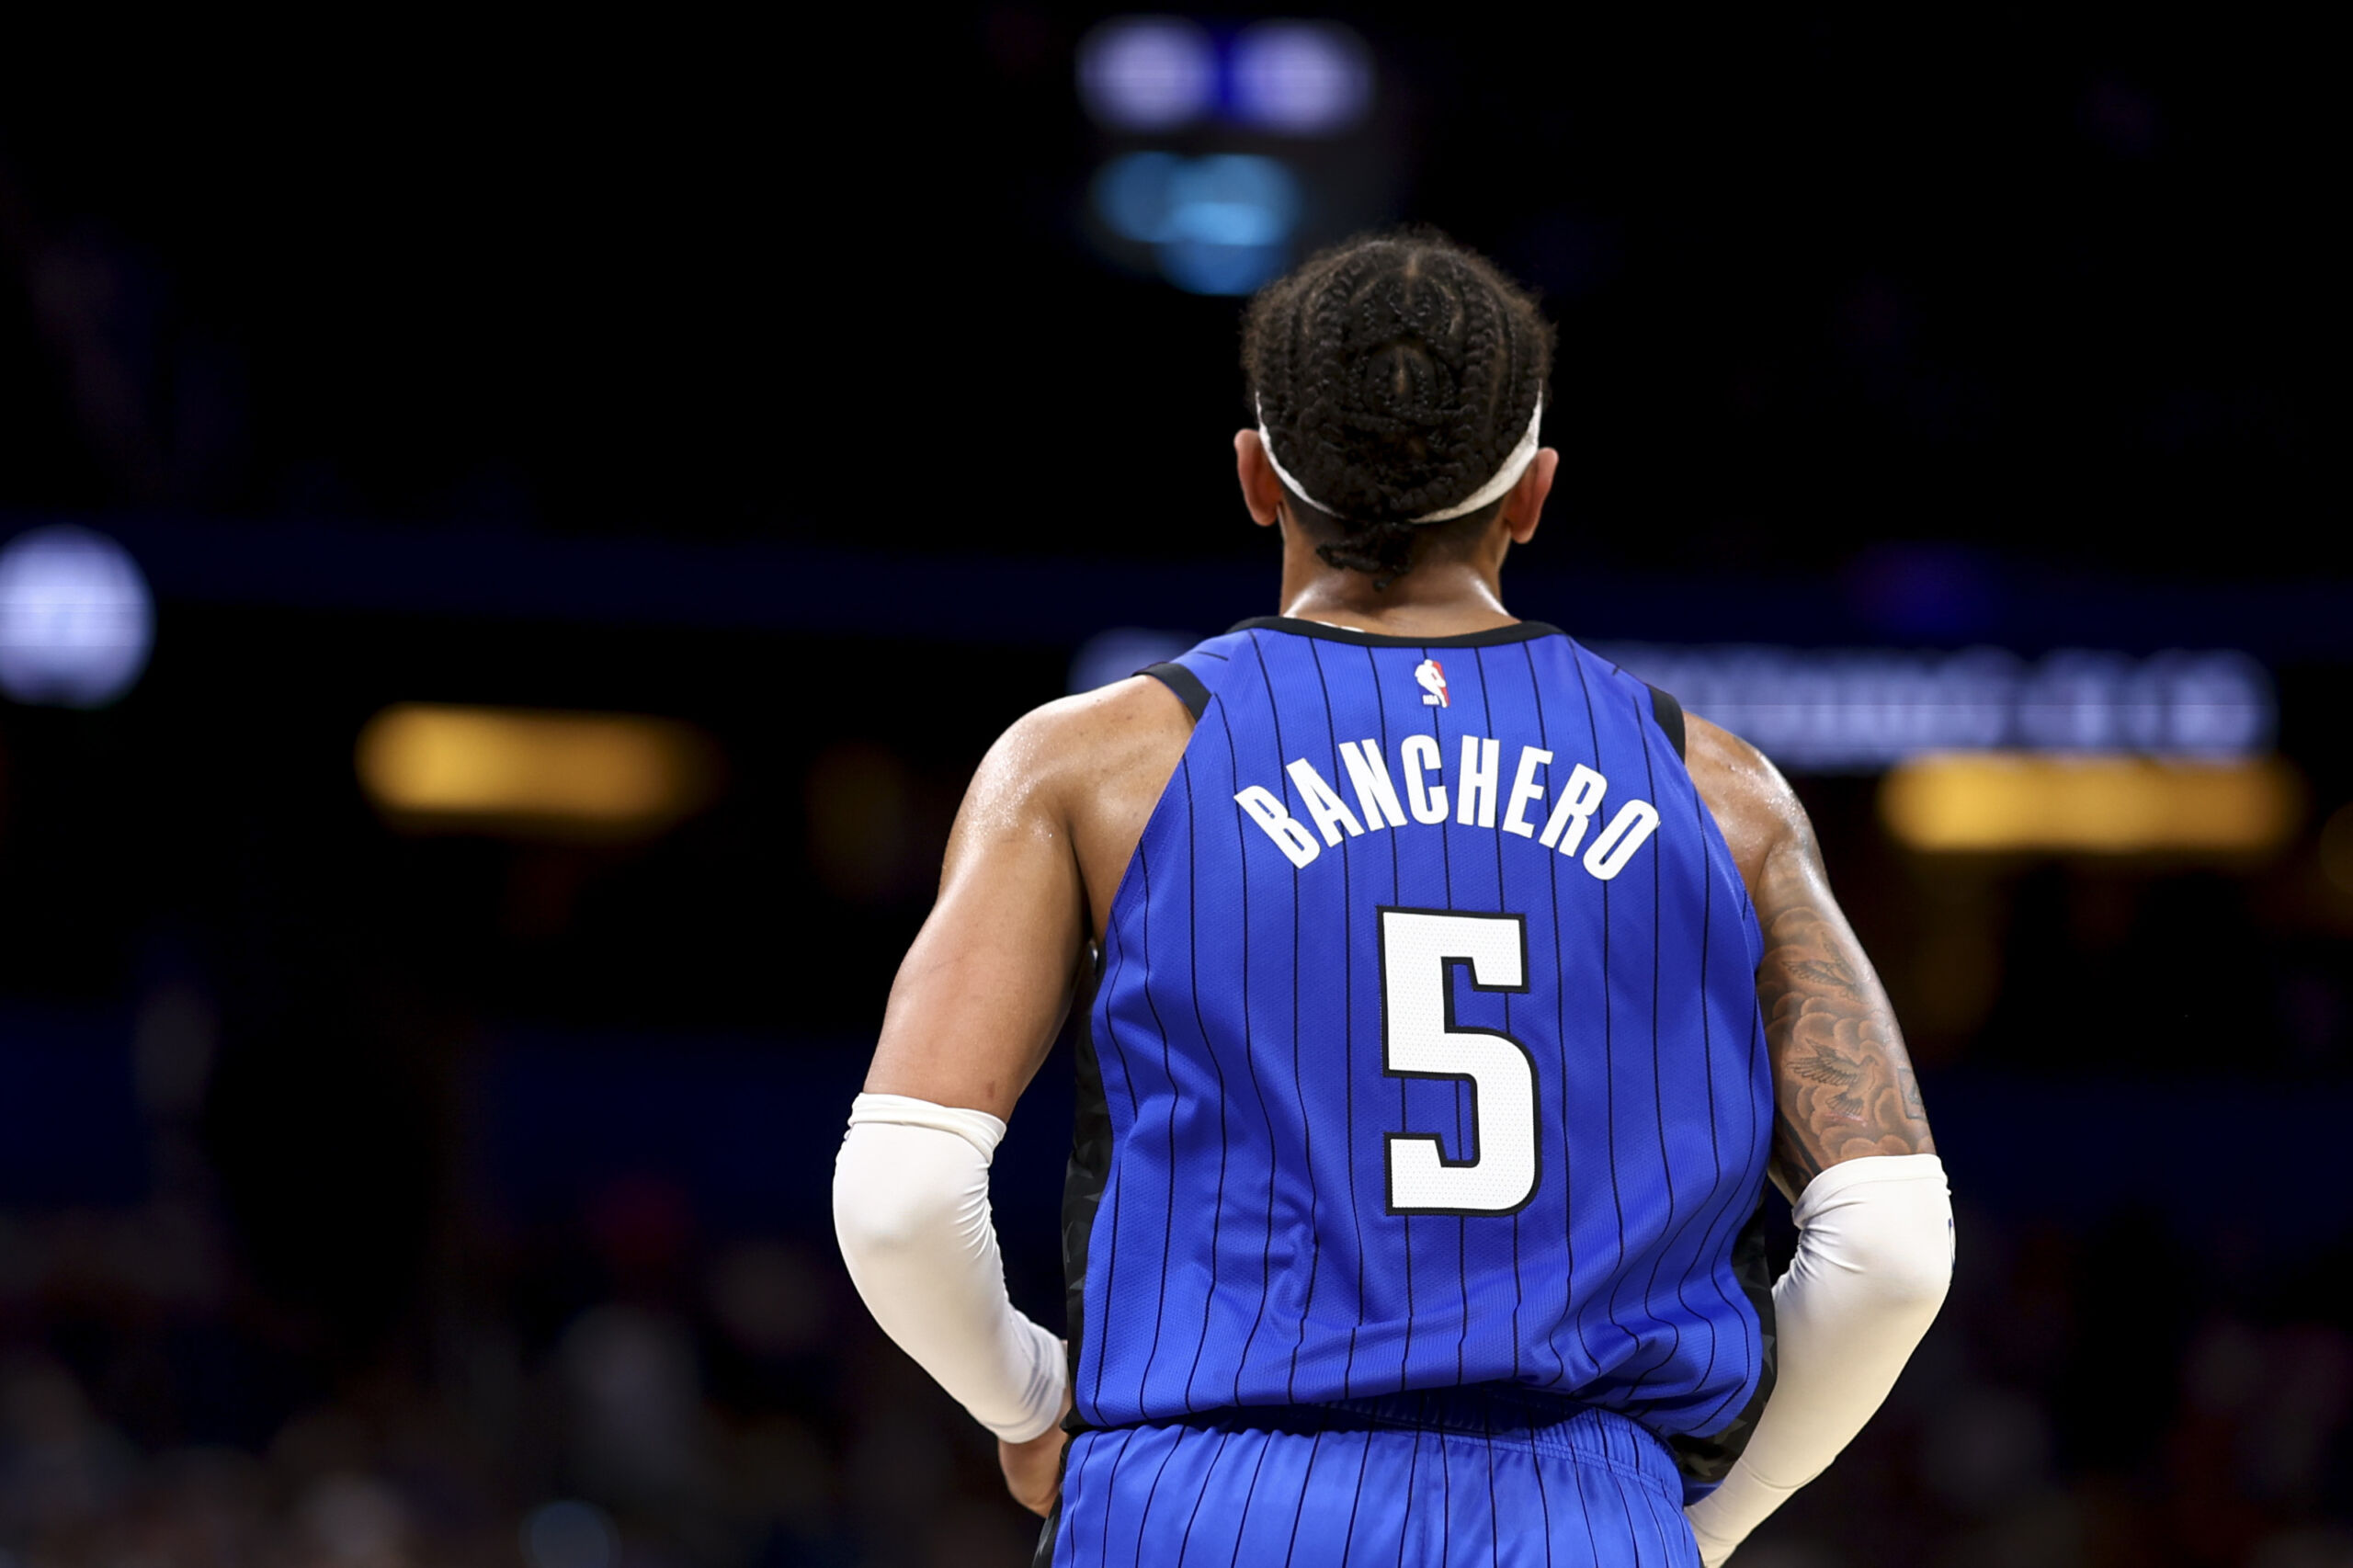 The 5 highest rebounding totals for Magic players in the NBA All